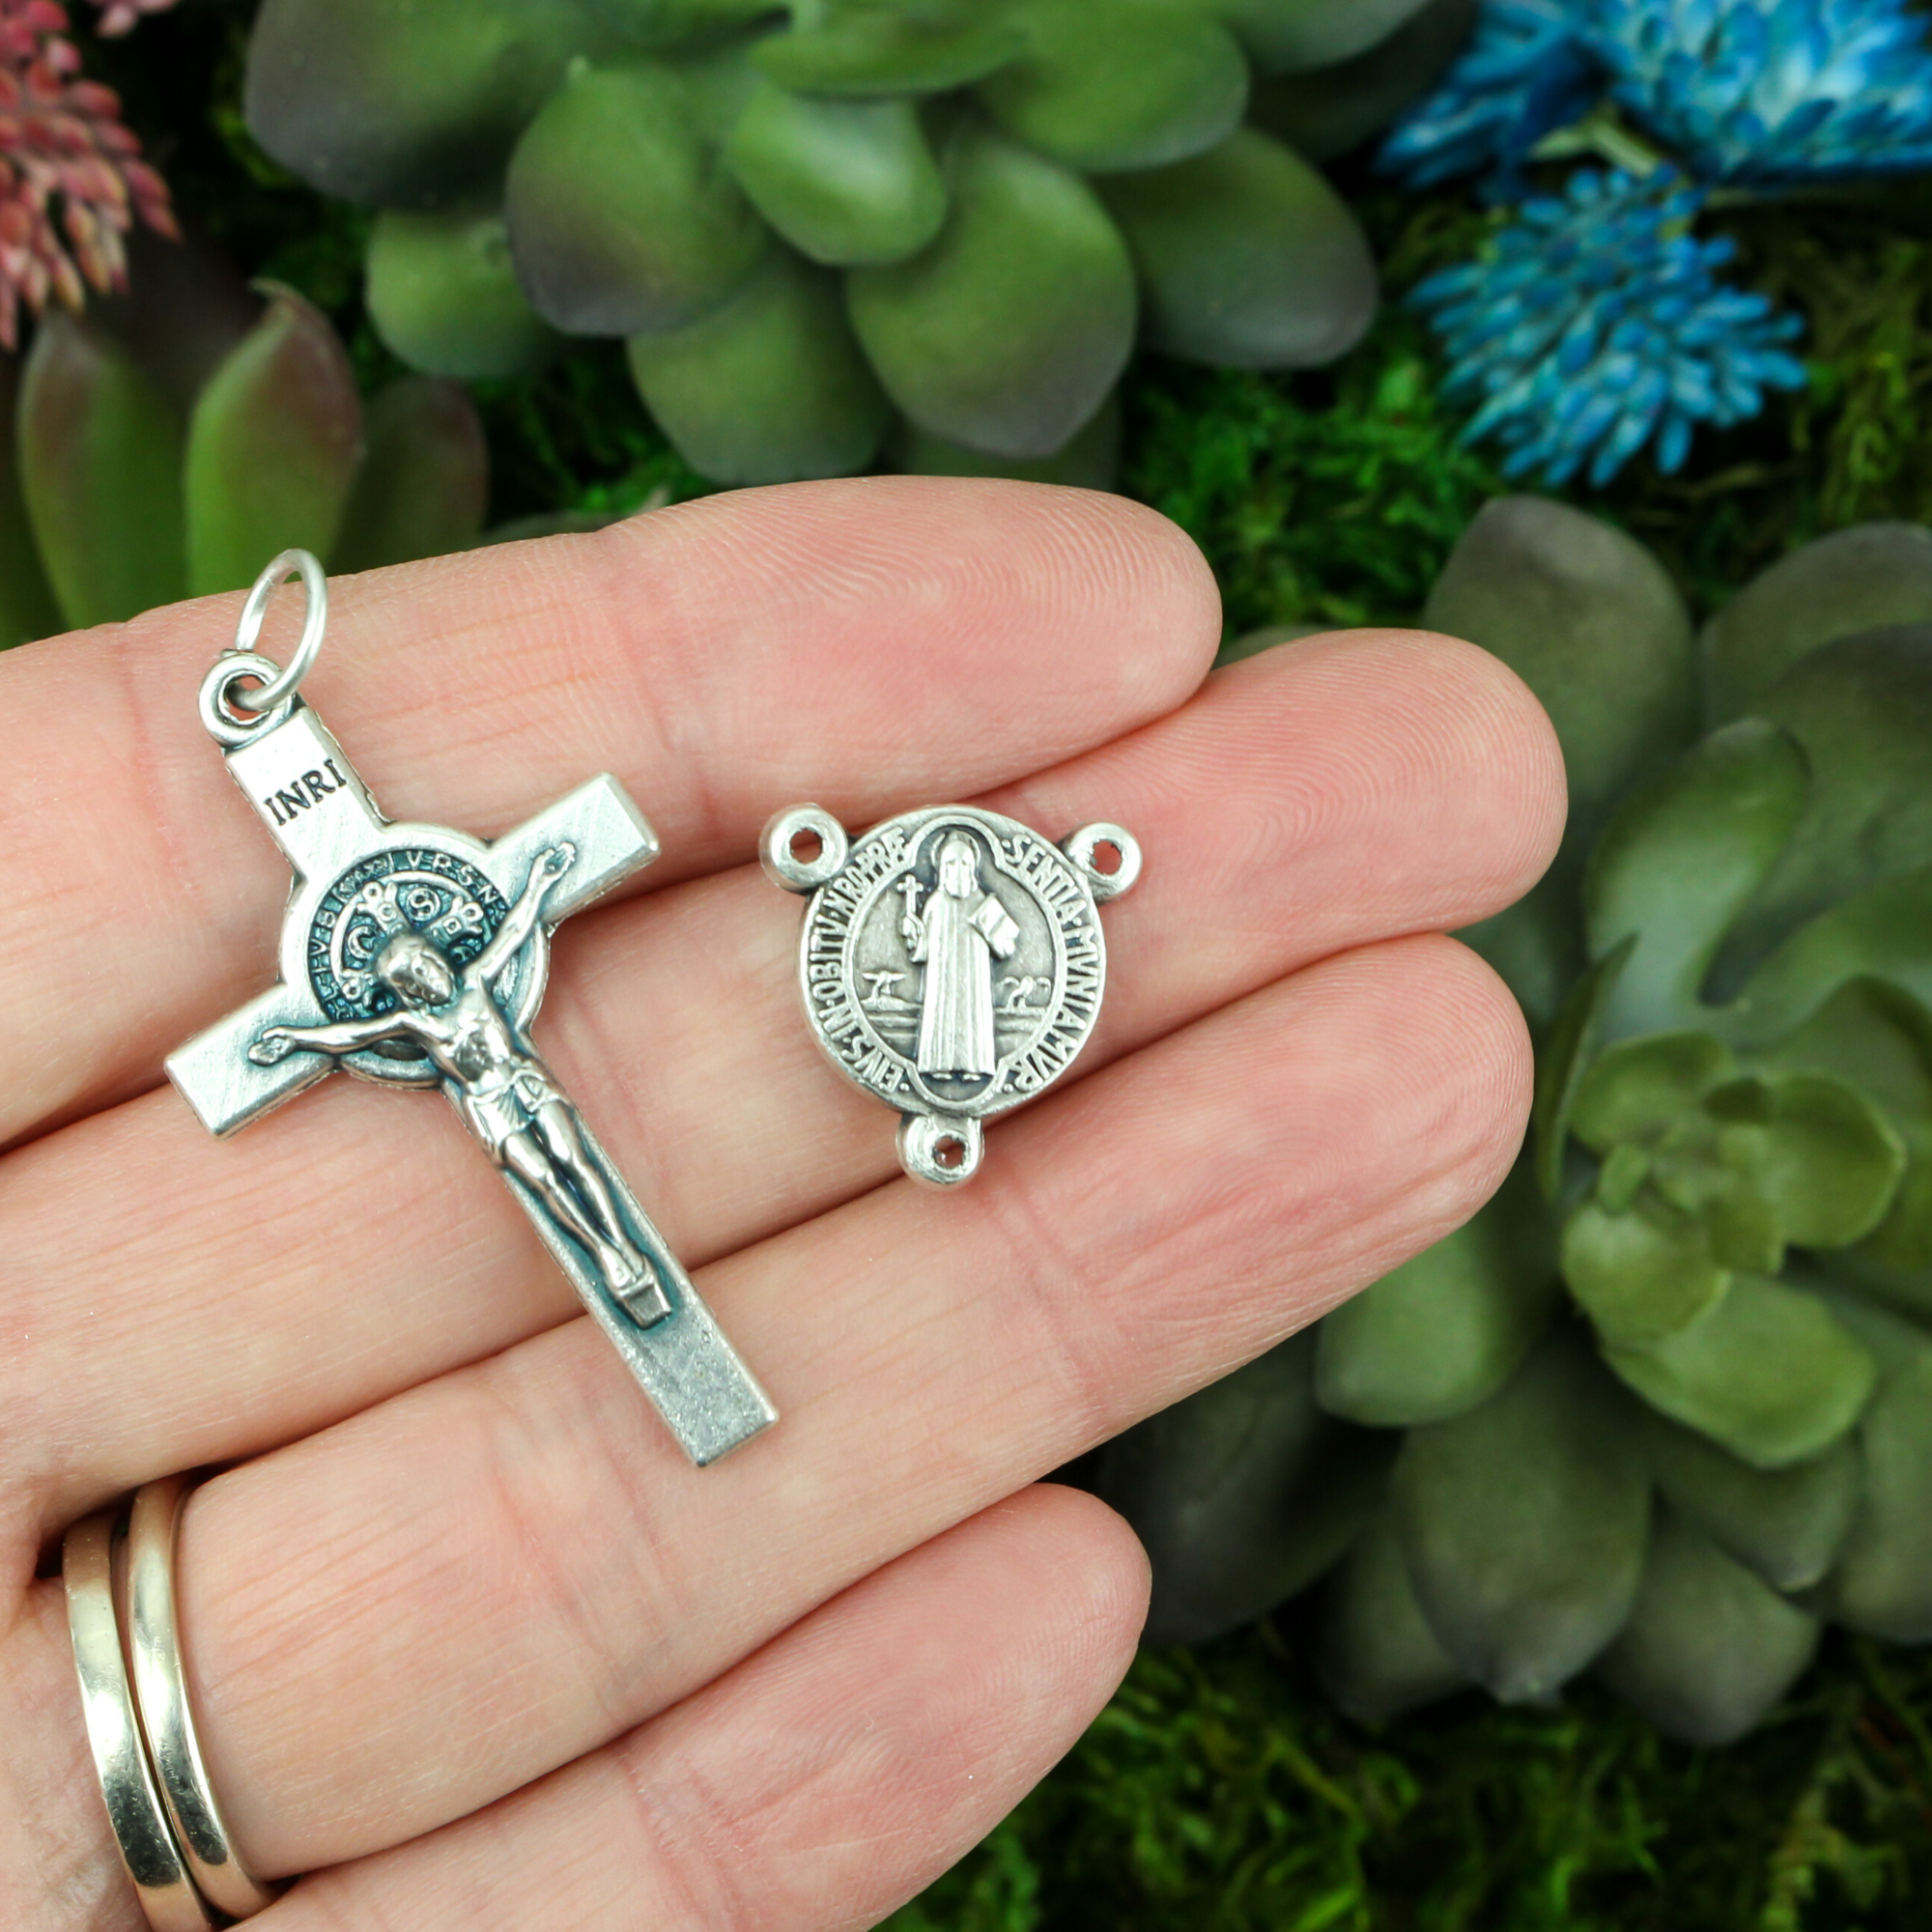 Pack of 3 - St Benedict Crucifix Cross for Rosary Making 1.5 inch Silver  Oxidized Crucifix Rosary Part for Saint Benedict Rosary or Rosary Making